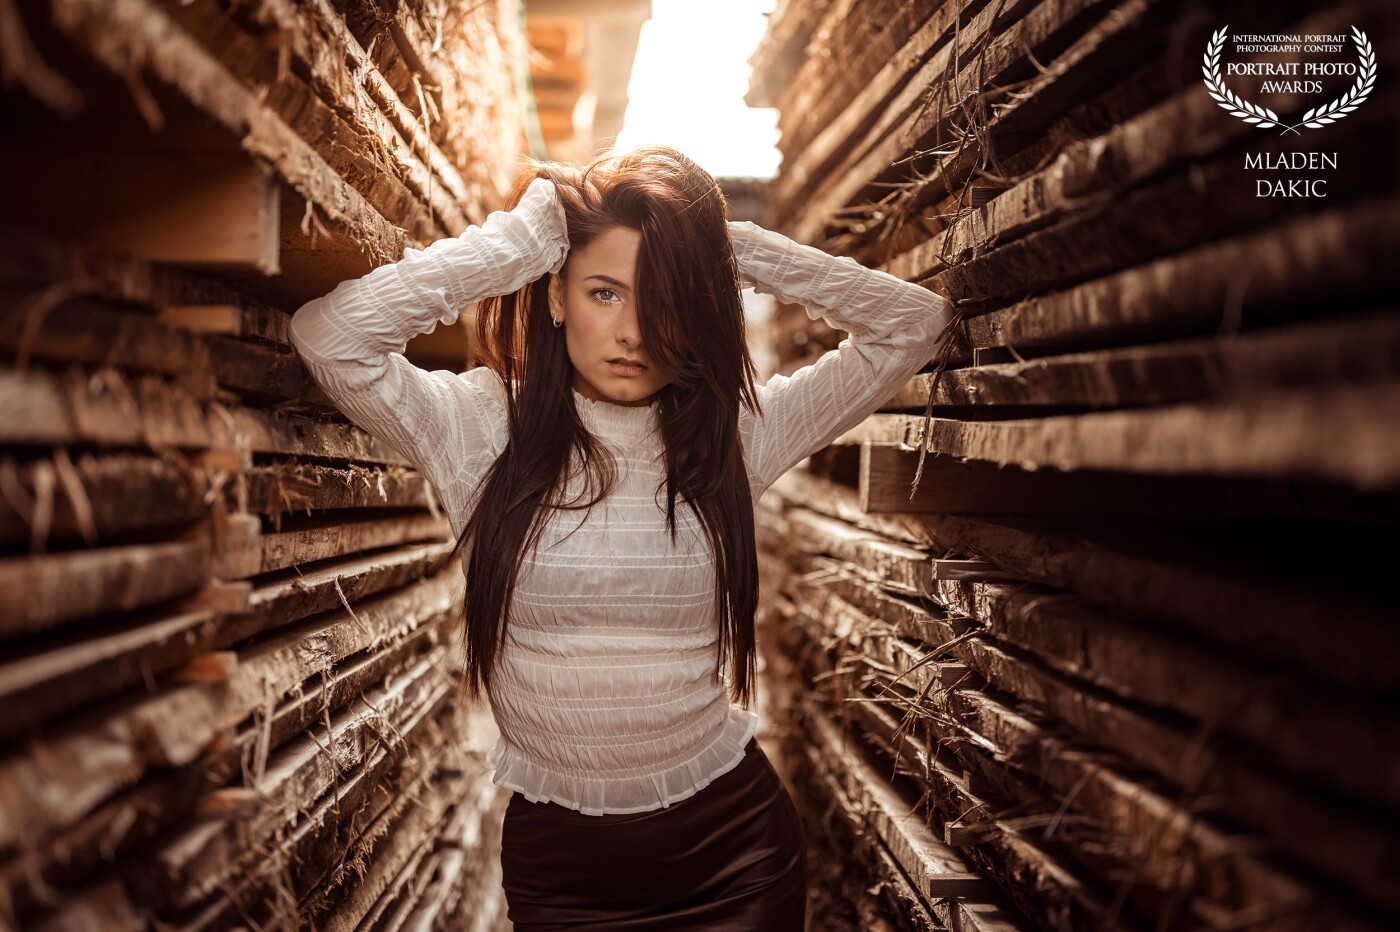 This photo of my model Lina (linaexp on IG) is the result of a great photo shooting day. I saw this sawmill with the stacks of wooden planks and spontaneously decided that this location we should use for the finish of the day. <br />
One set we made there ist this one in between these wooden plank stacks where I shoot the model against the evening sun. I named the picture "Wooden Perspectives".<br />
<br />
I used natural light only.